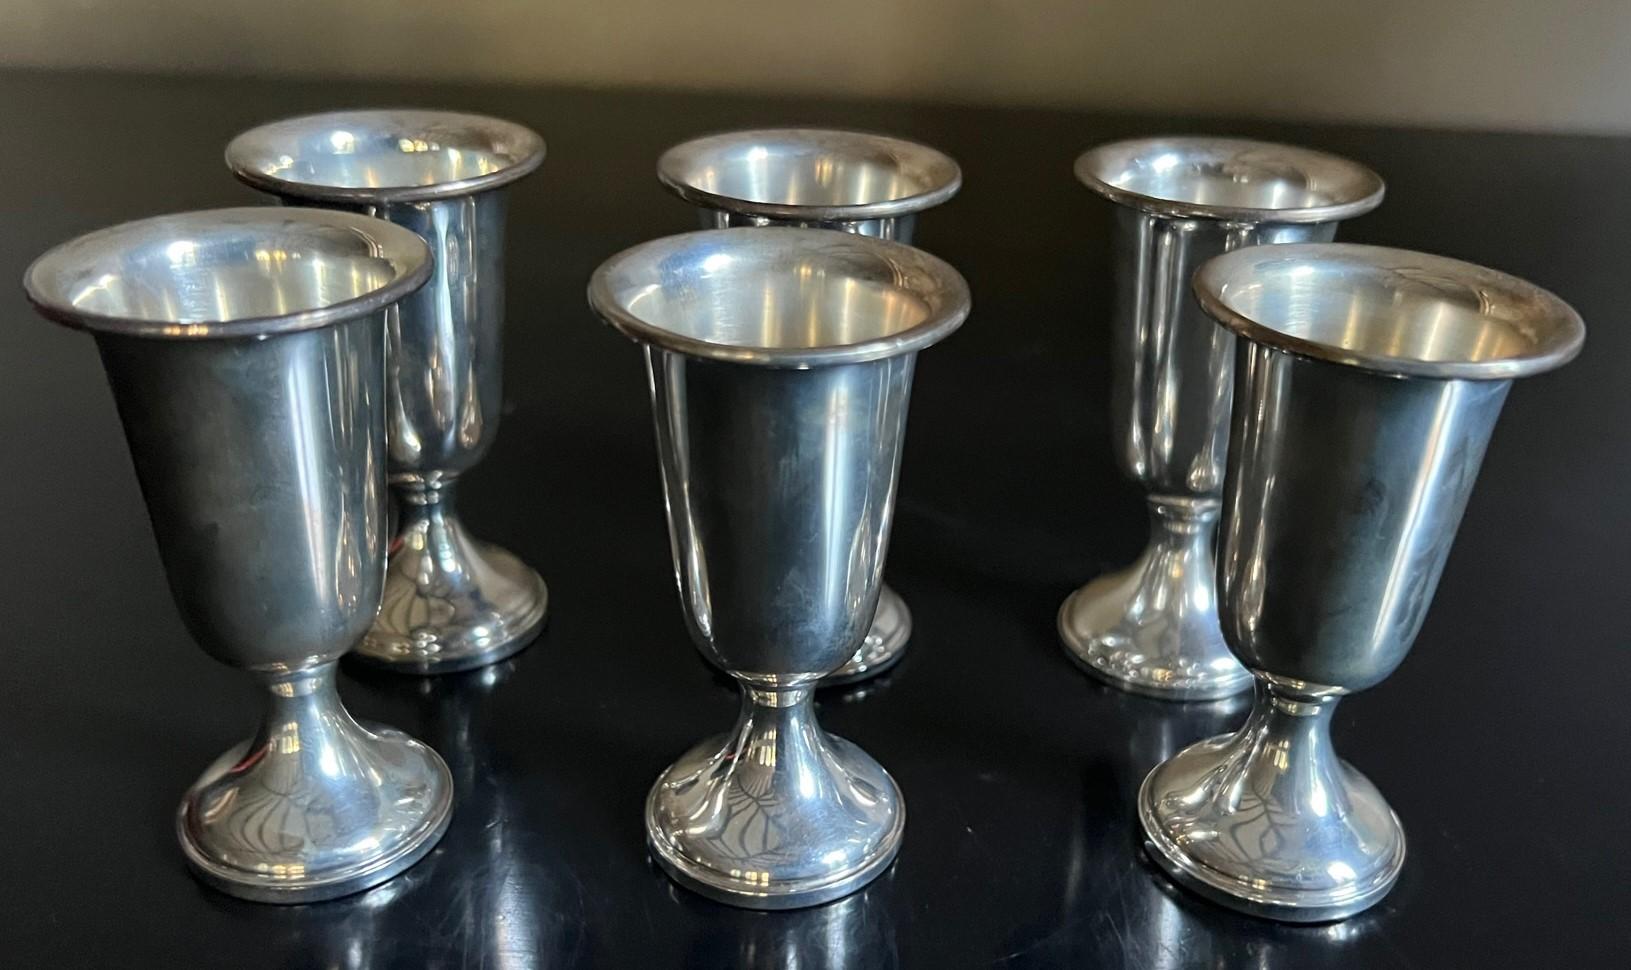 Sterling silver cordial / aperitif cups by Towle. In original box for storage or gifting. Stamped on the bottom towle sterling weighted & reinforced.